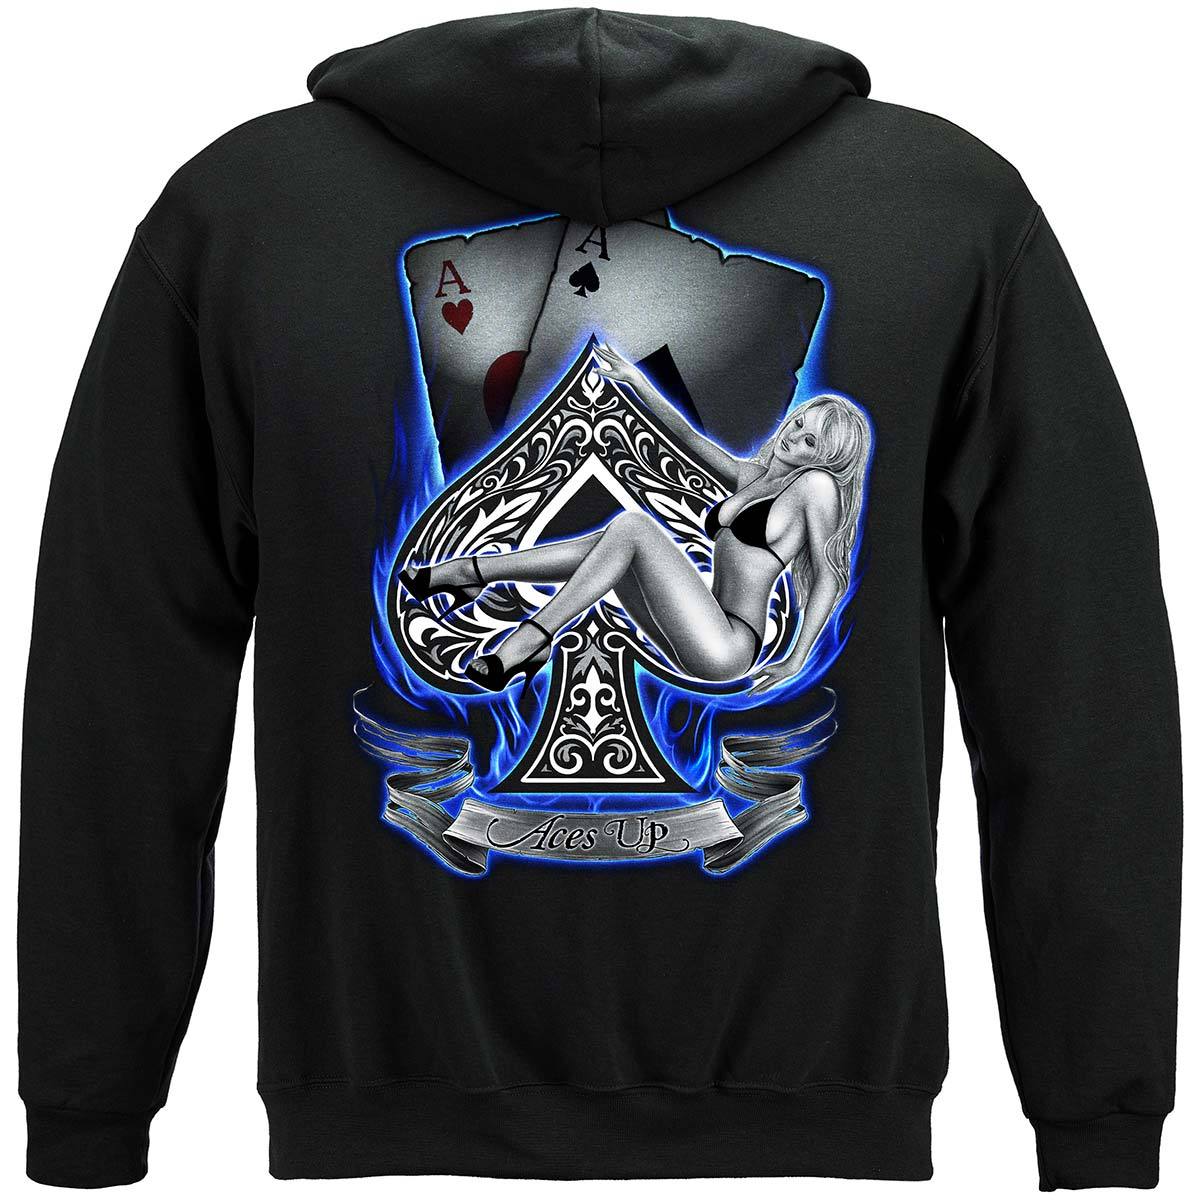 Aces Up Premium Hooded Sweat Shirt